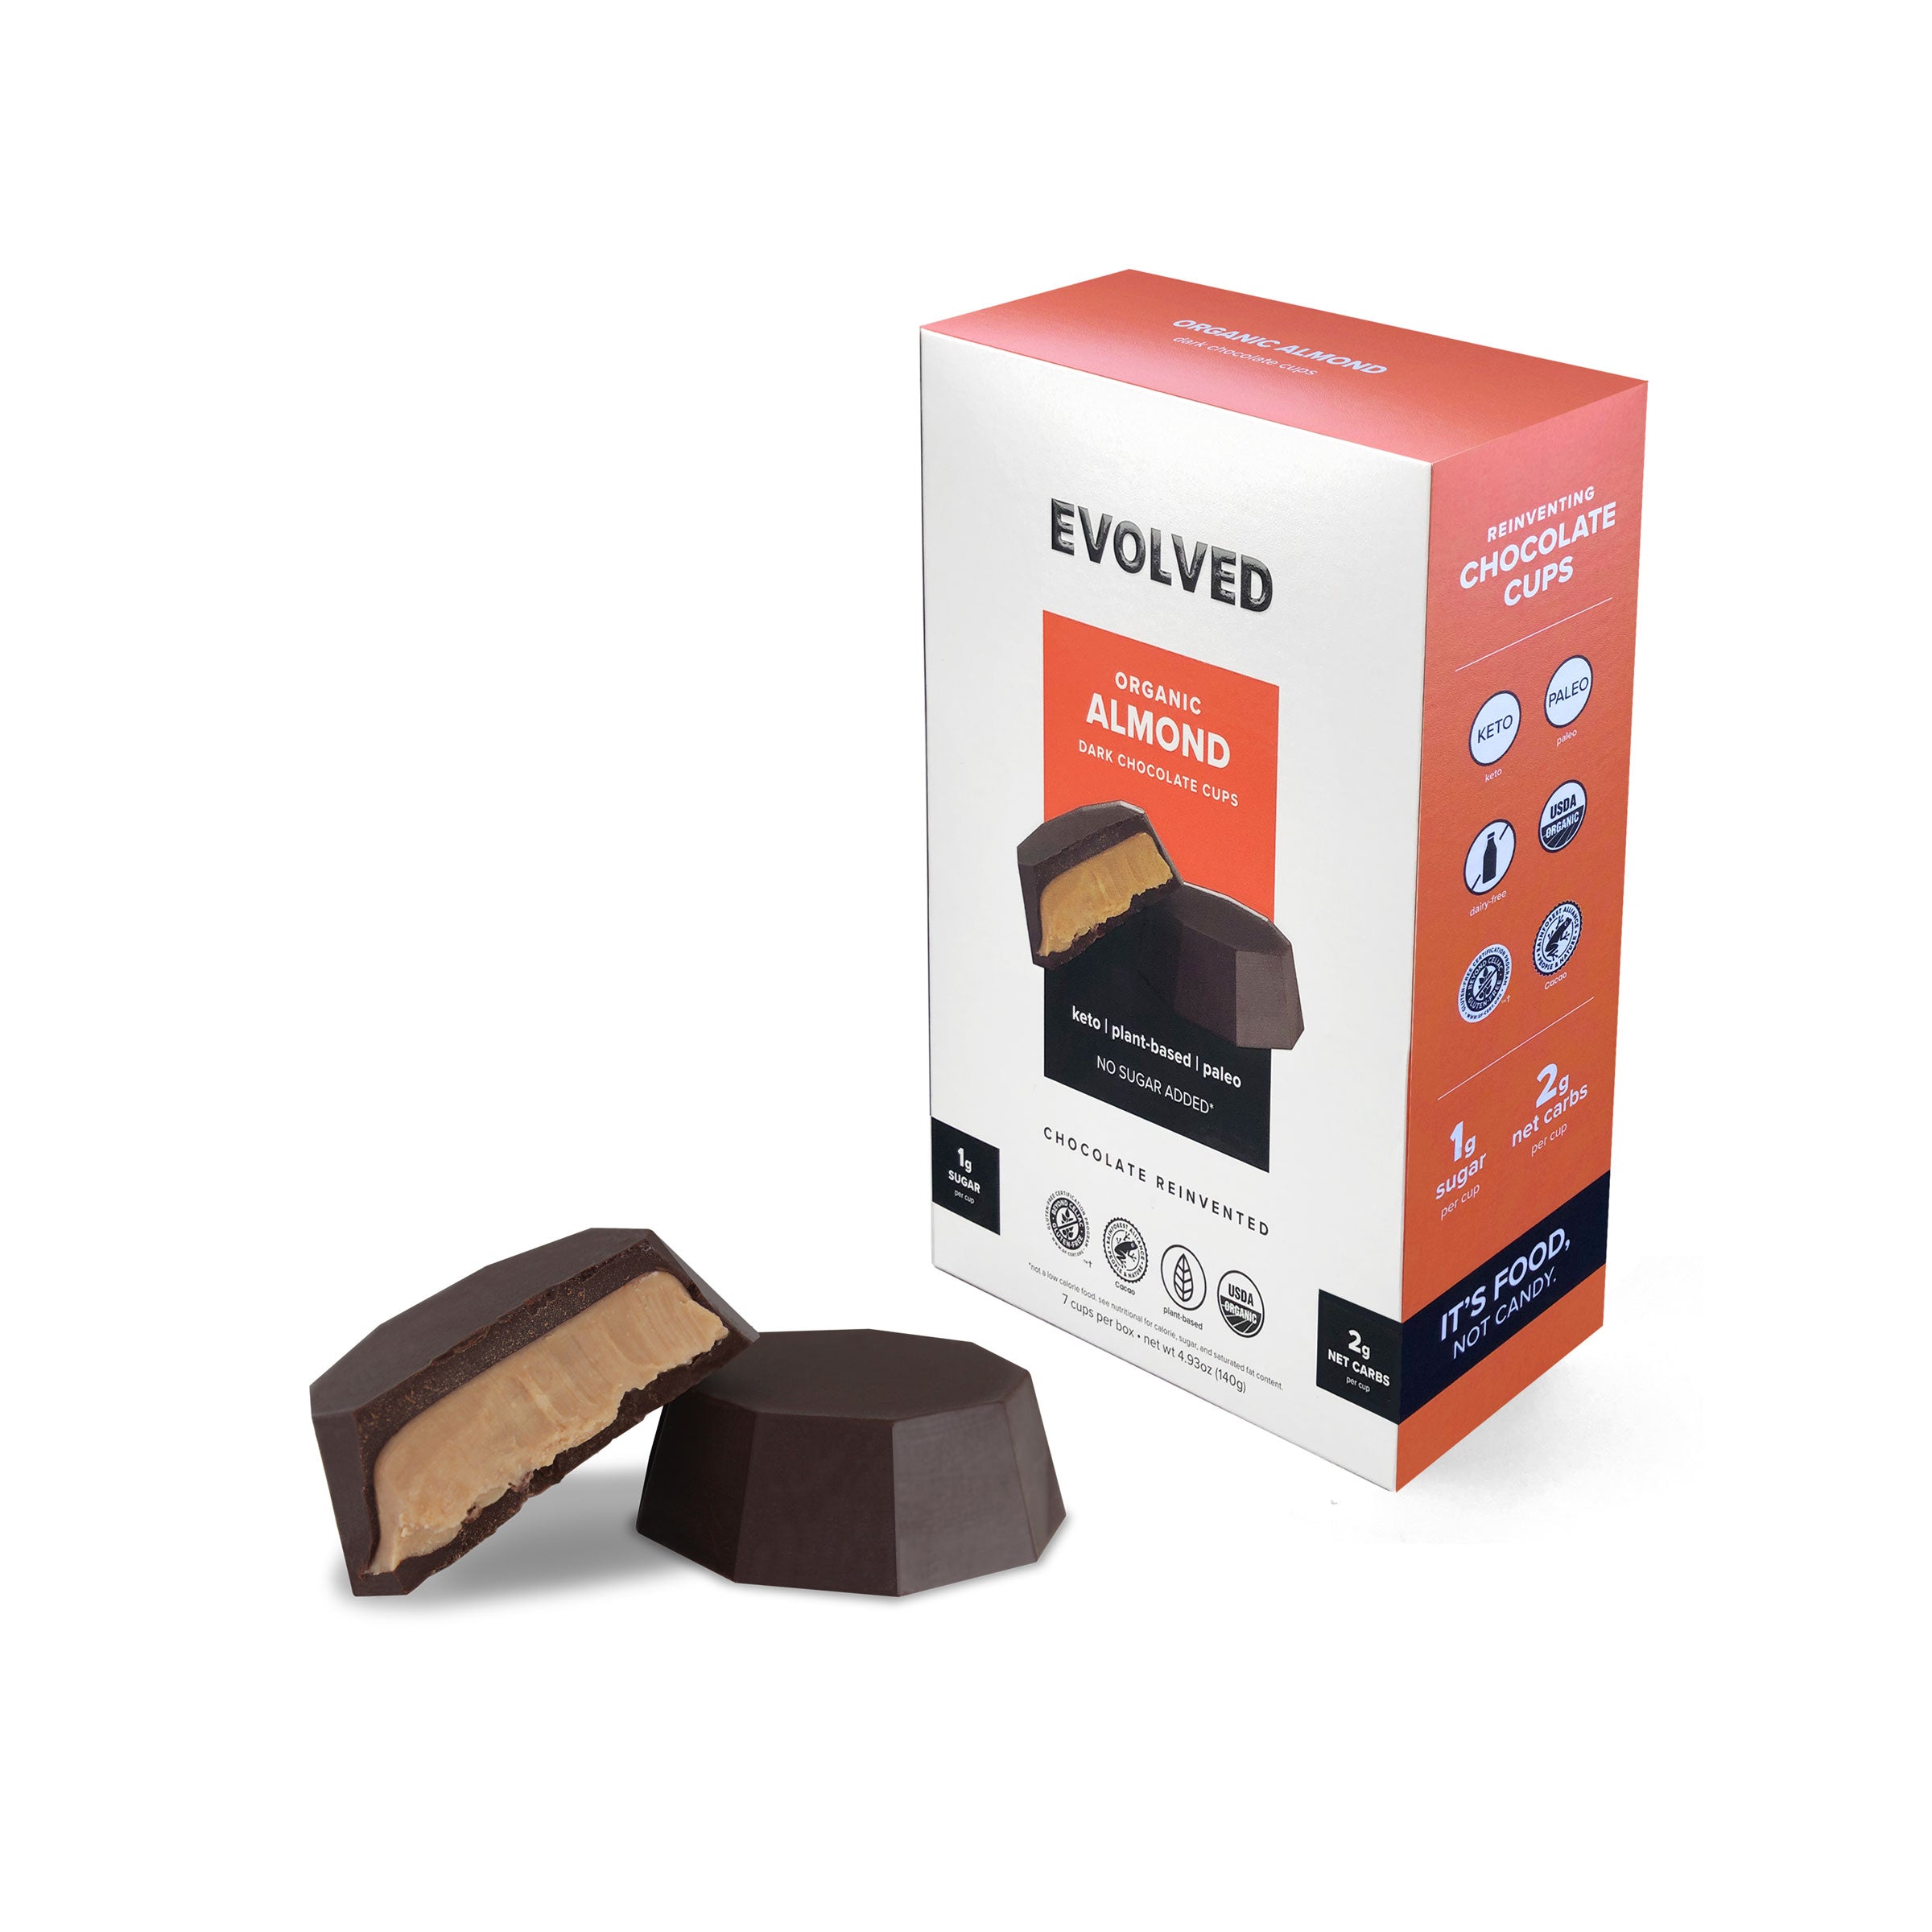 ALMOND BUTTER CUPS – EVOLVED CHOCOLATE